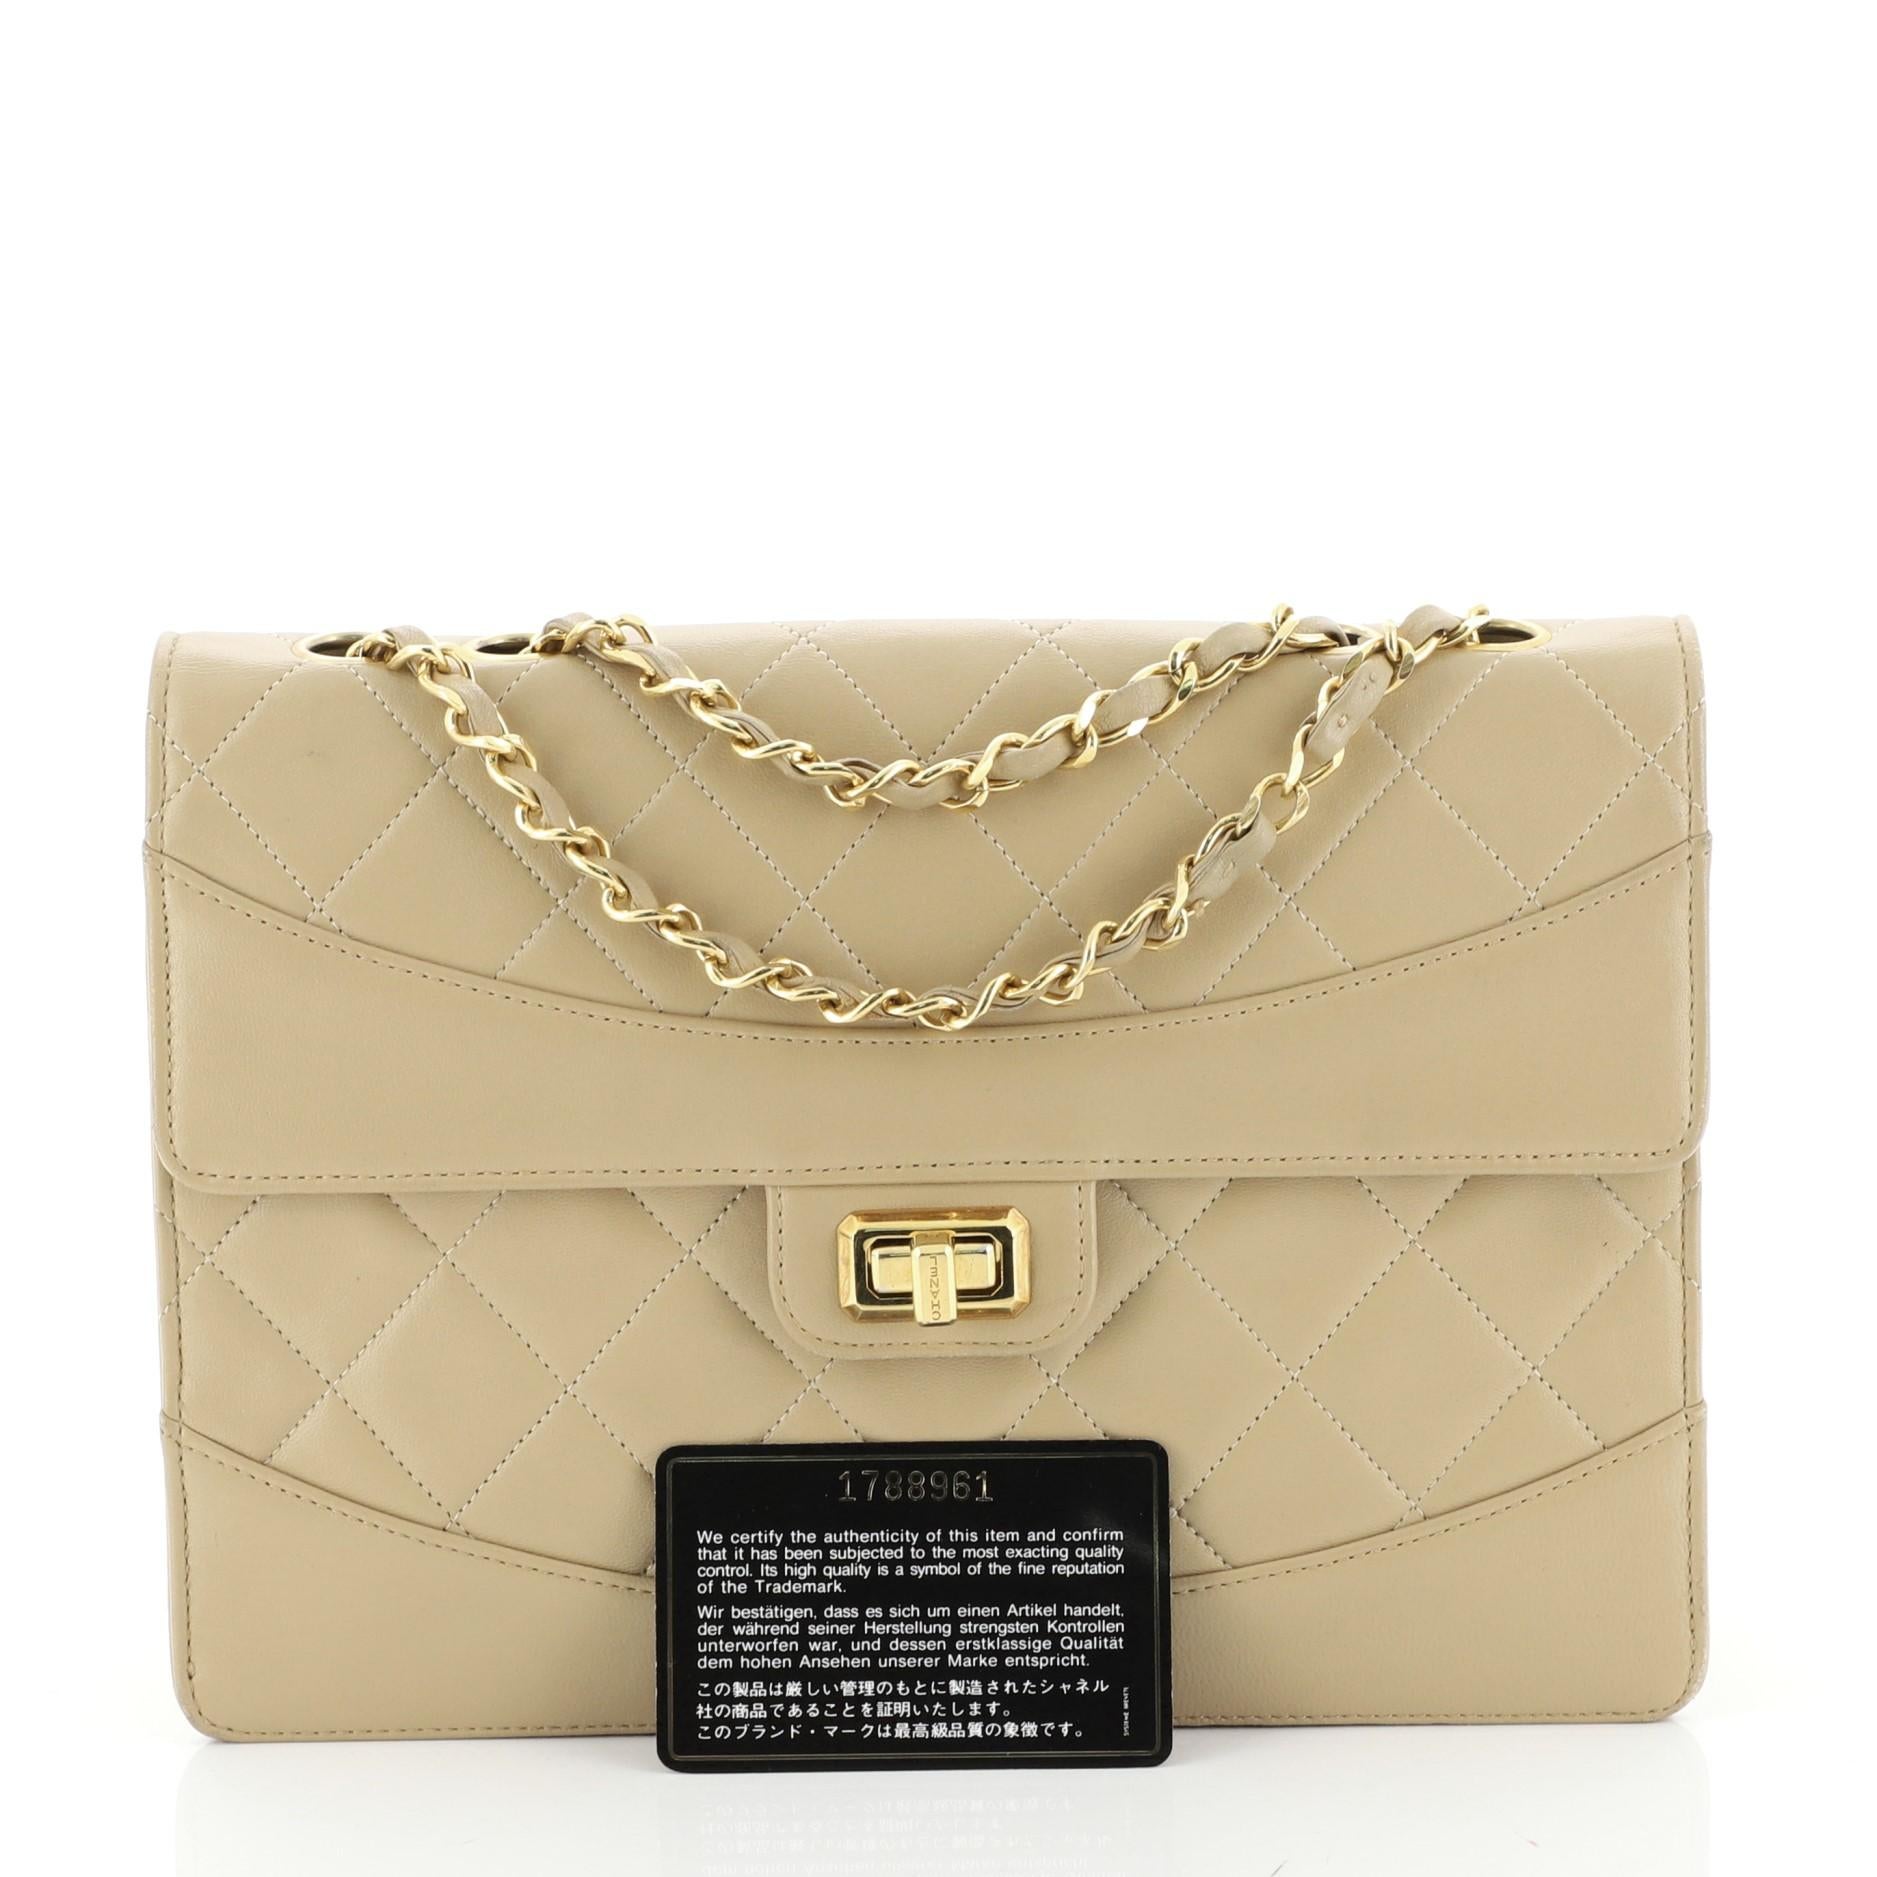 This Chanel Vintage Trapezoid Flap Lock Bag Leather Medium, crafted in neutral leather, features woven-in leather chain strap, protective base studs, and gold-tone hardware. Its turn-lock closure opens to a neutral leather interior with side zip and